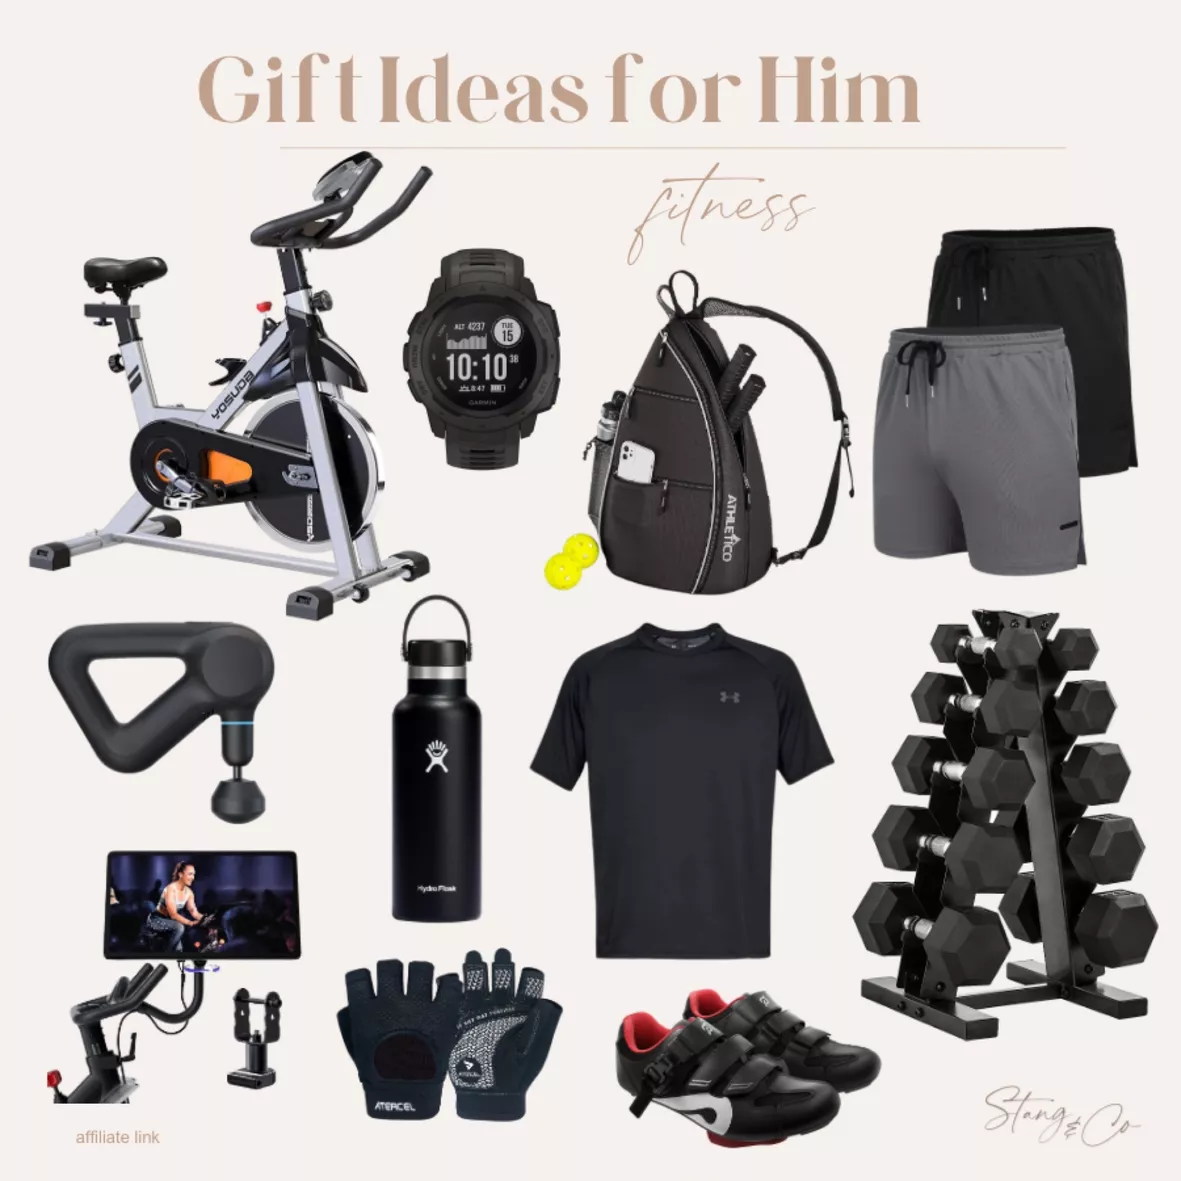 ULTIMATE FITNESS GIFT GUIDE FOR HIM, 10 GIFT IDEAS